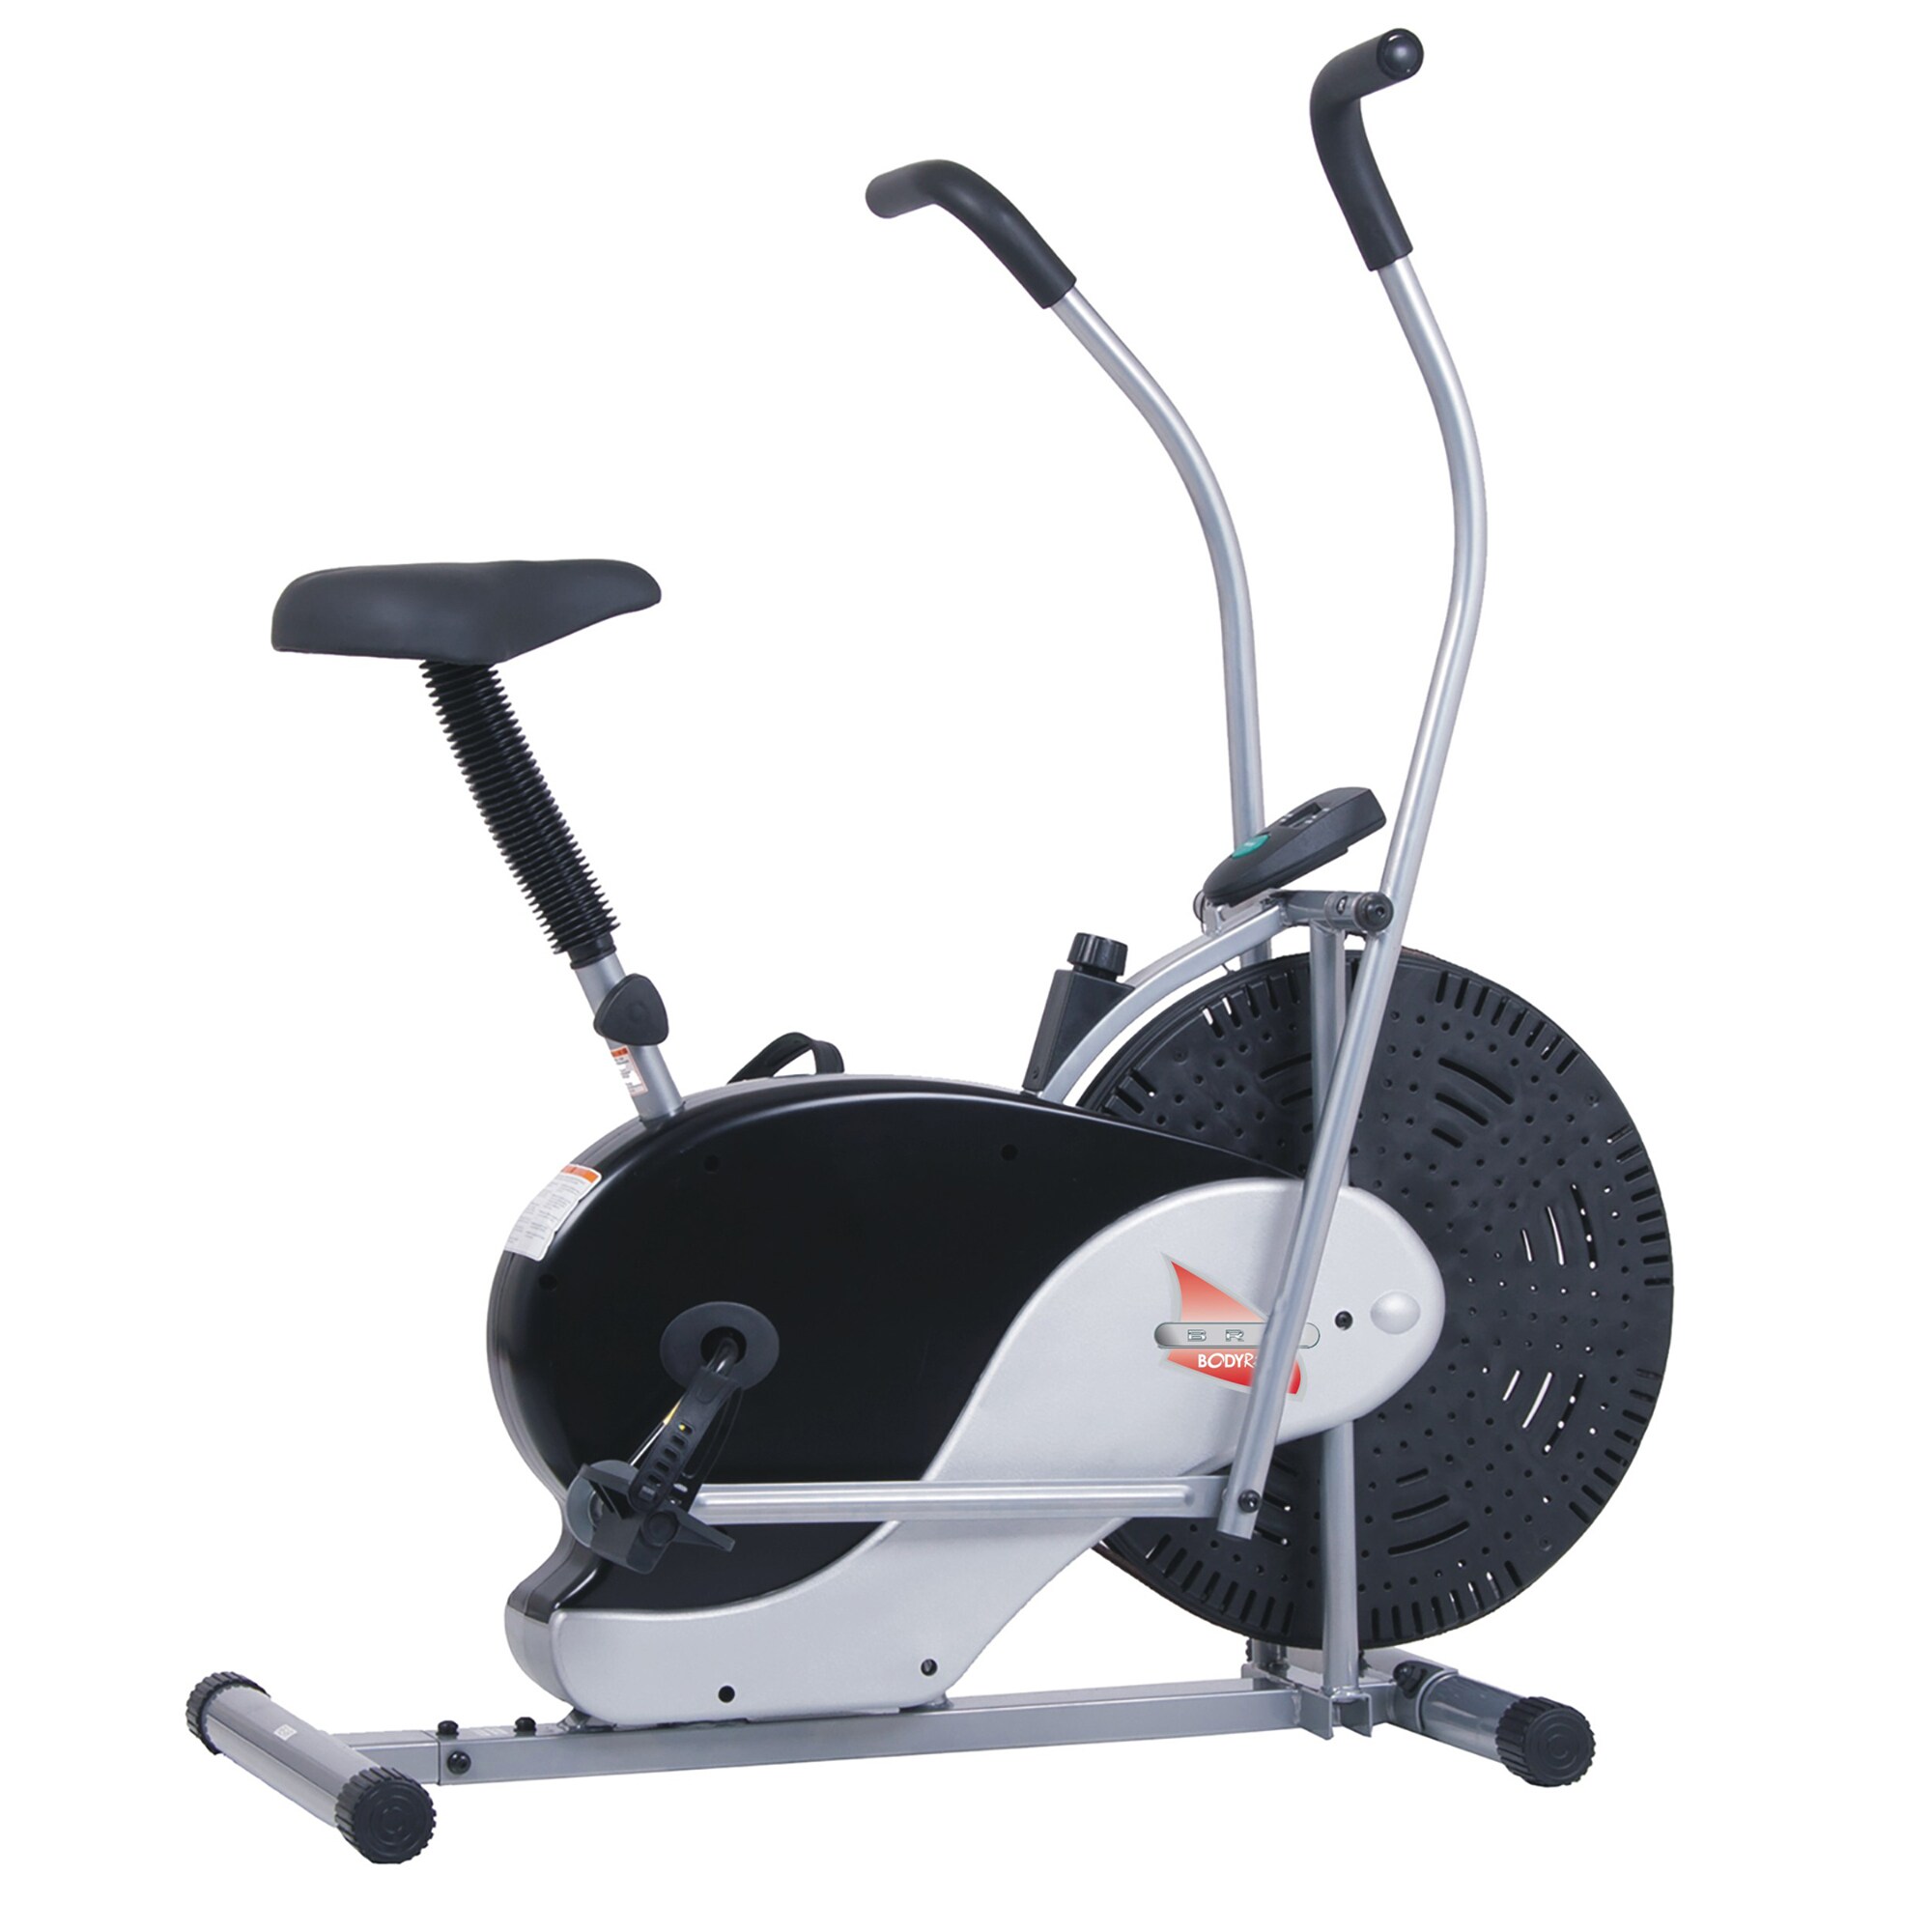 Body Flex Sports Friction Upright Cycle Exercise Bike in the